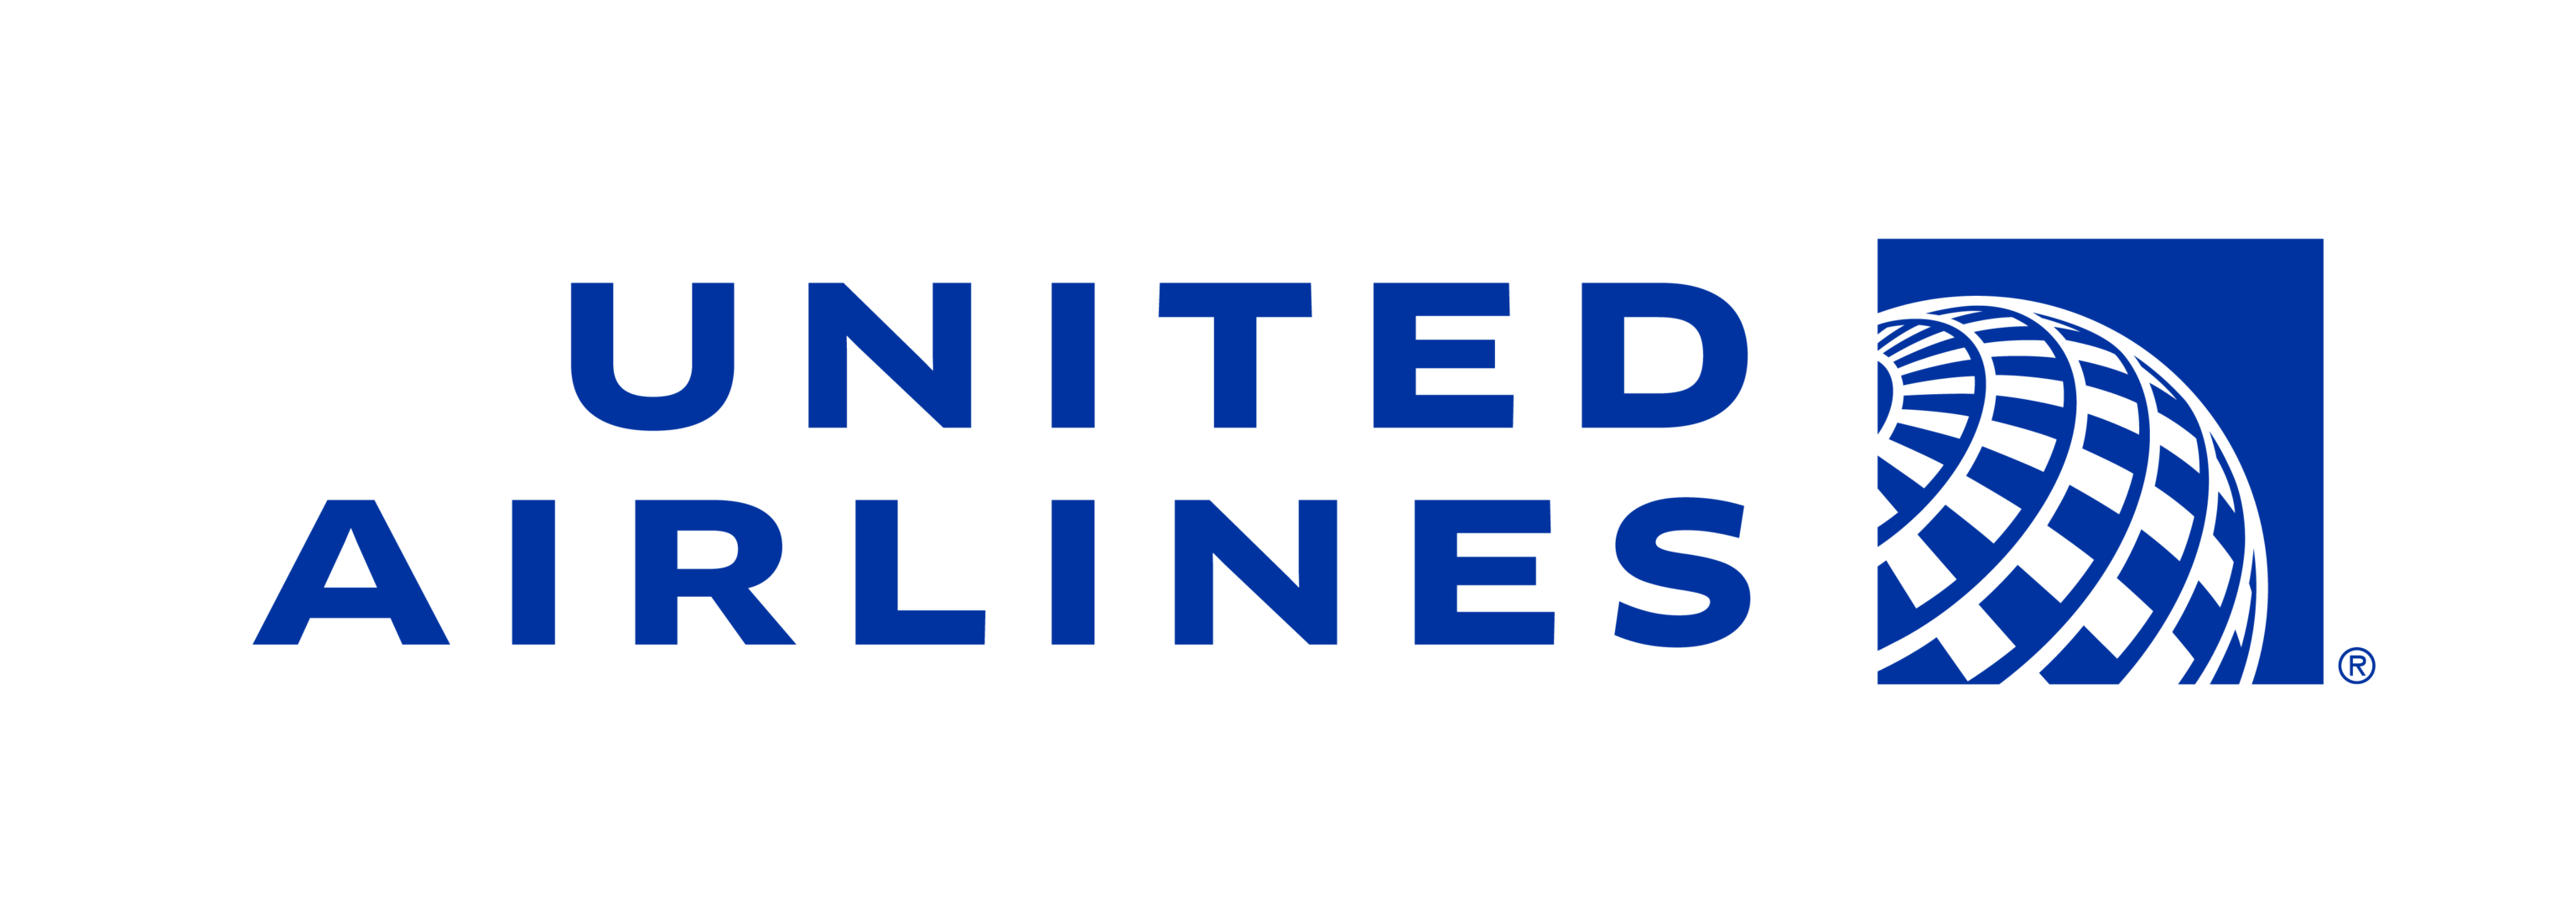 United Airlines New Logo - United Airlines Logo Png (93+ images in Collection) Page 1